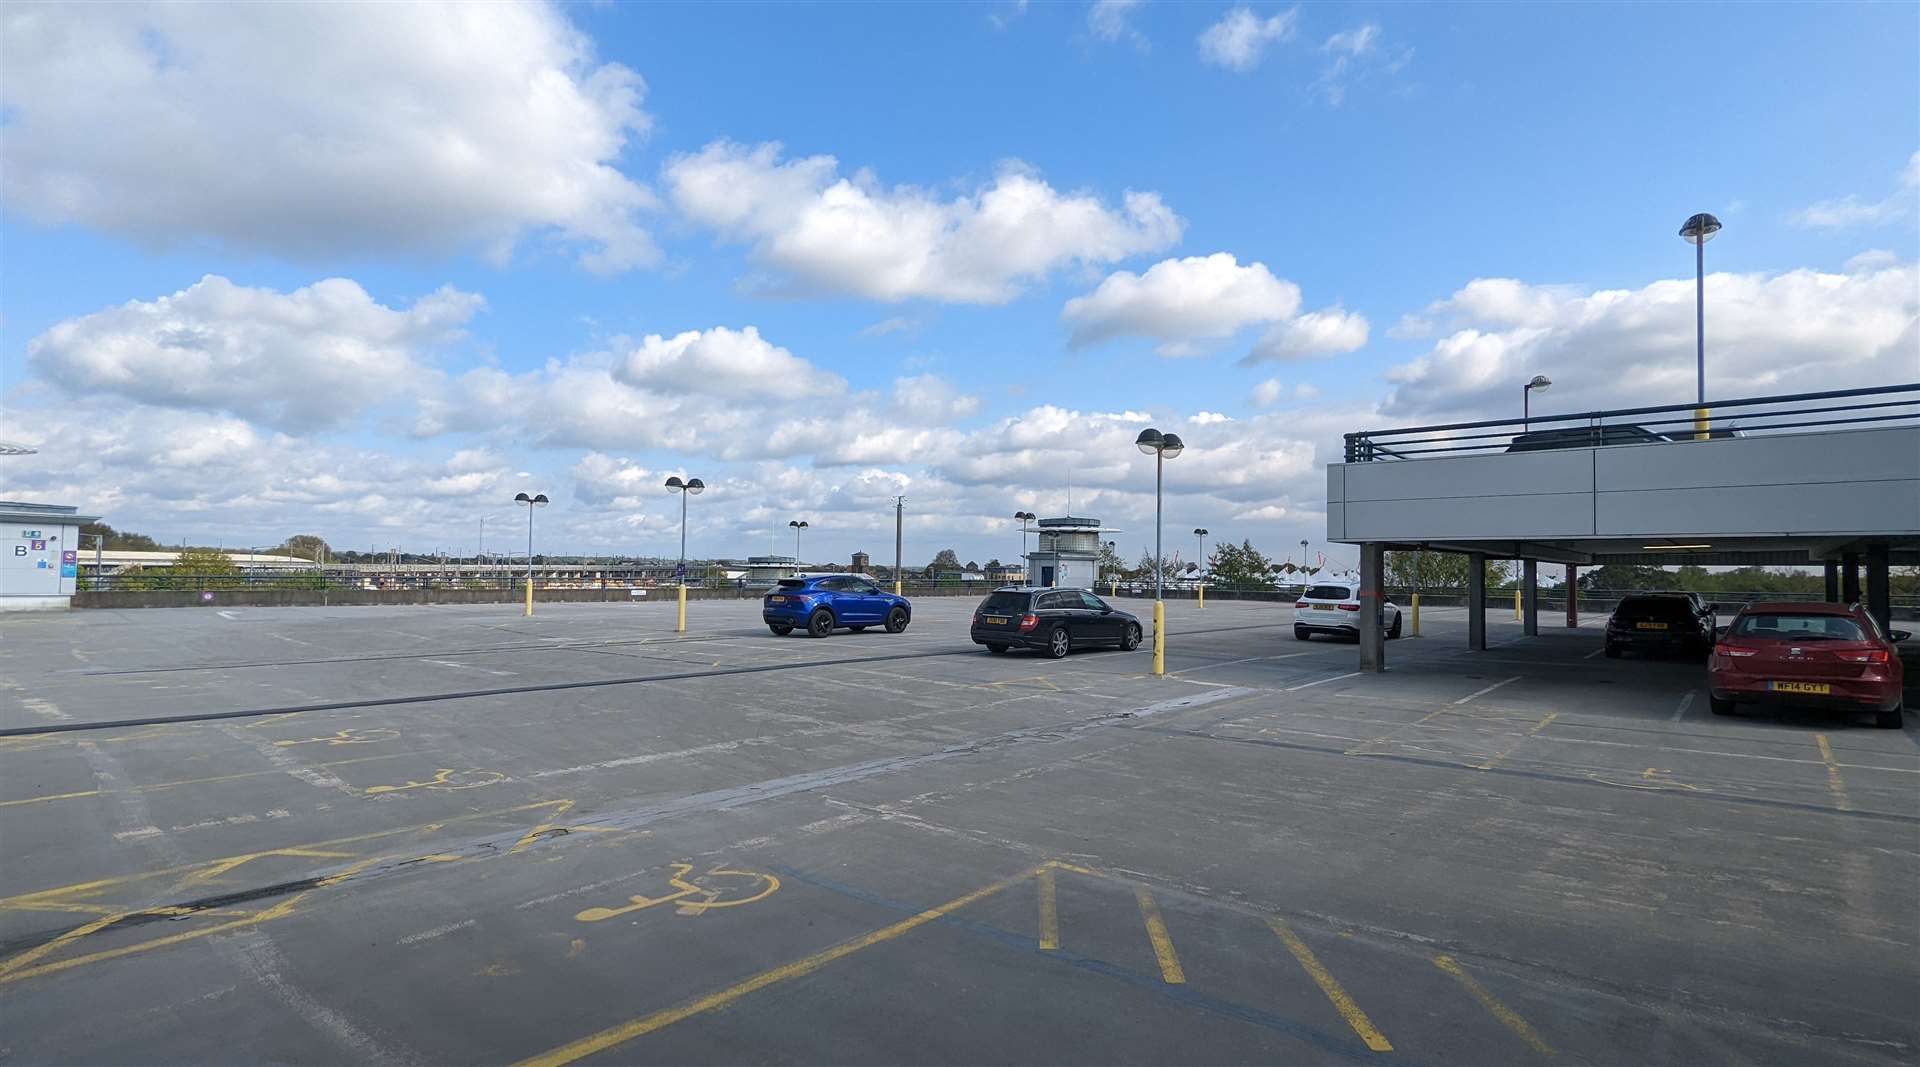 A largely empty car park at the international railway station in Ashford